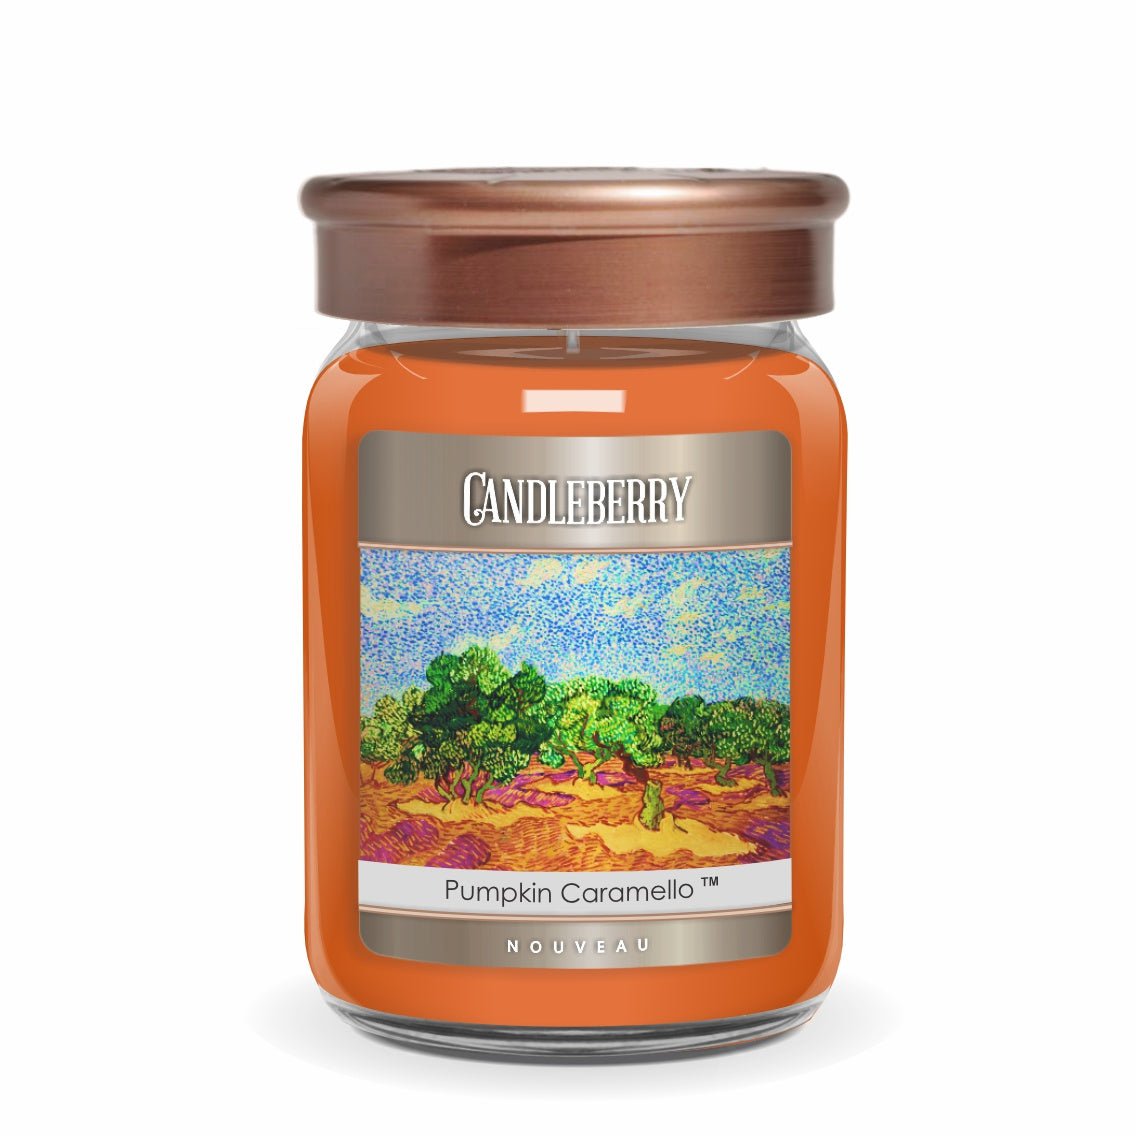  highly scented fall autumn pie caramel best selling candle premium natural vegan friendly soy coconut wax powerful 10 percent load fragrance